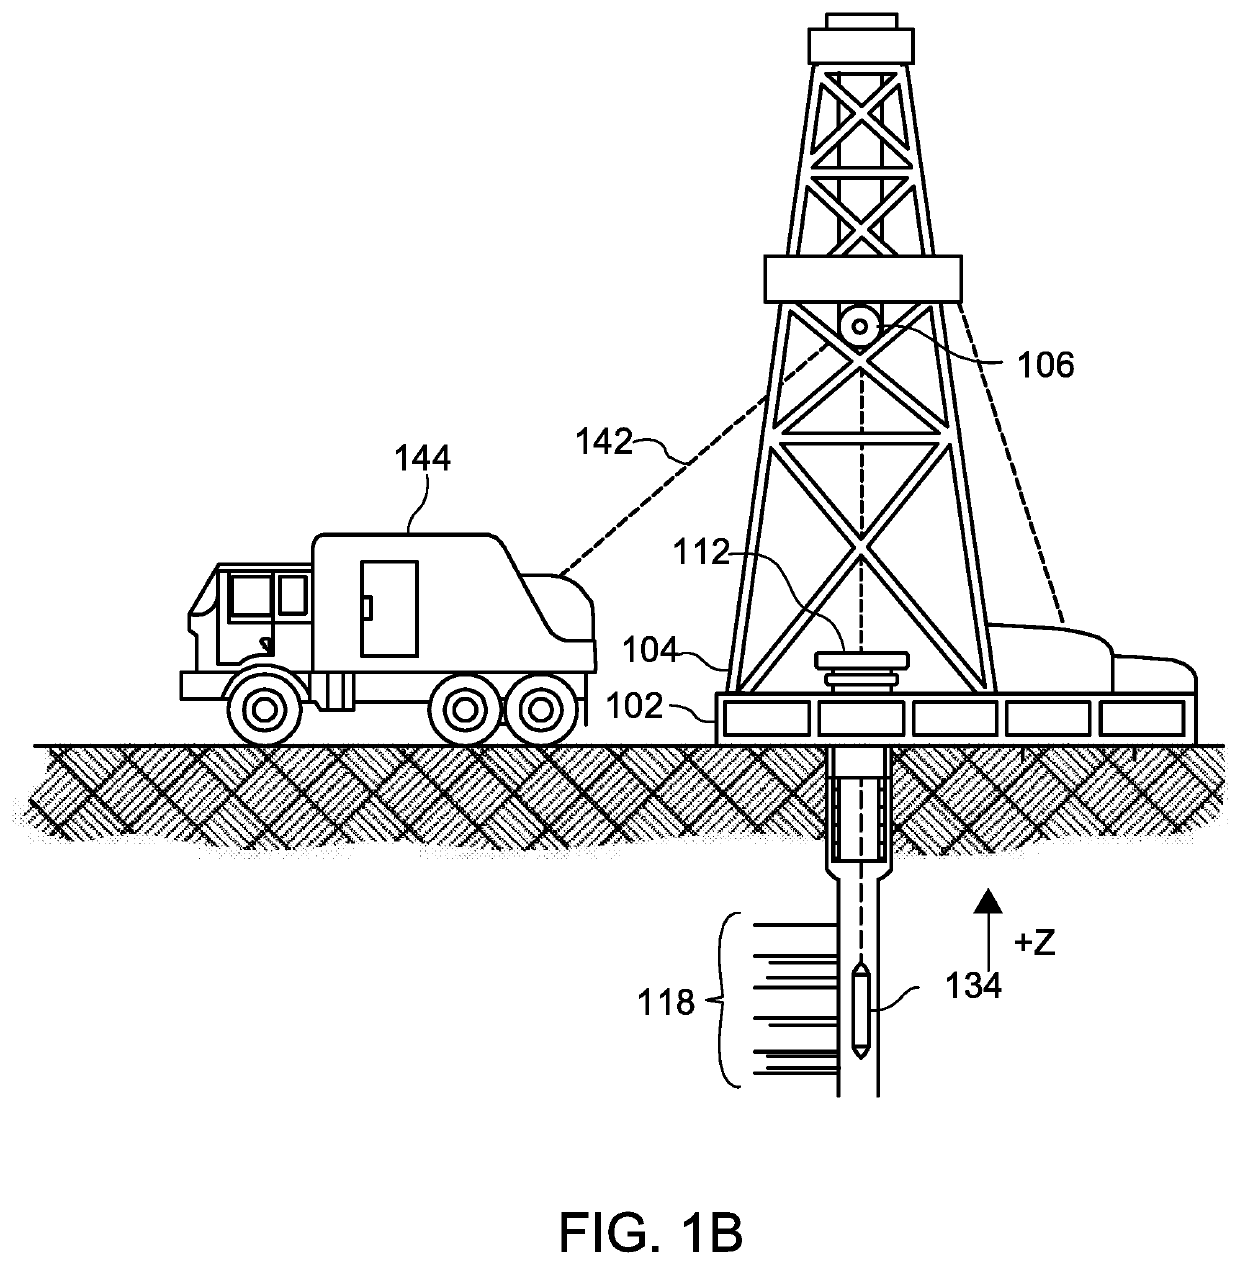 Fluid communication method for hydraulic fracturing